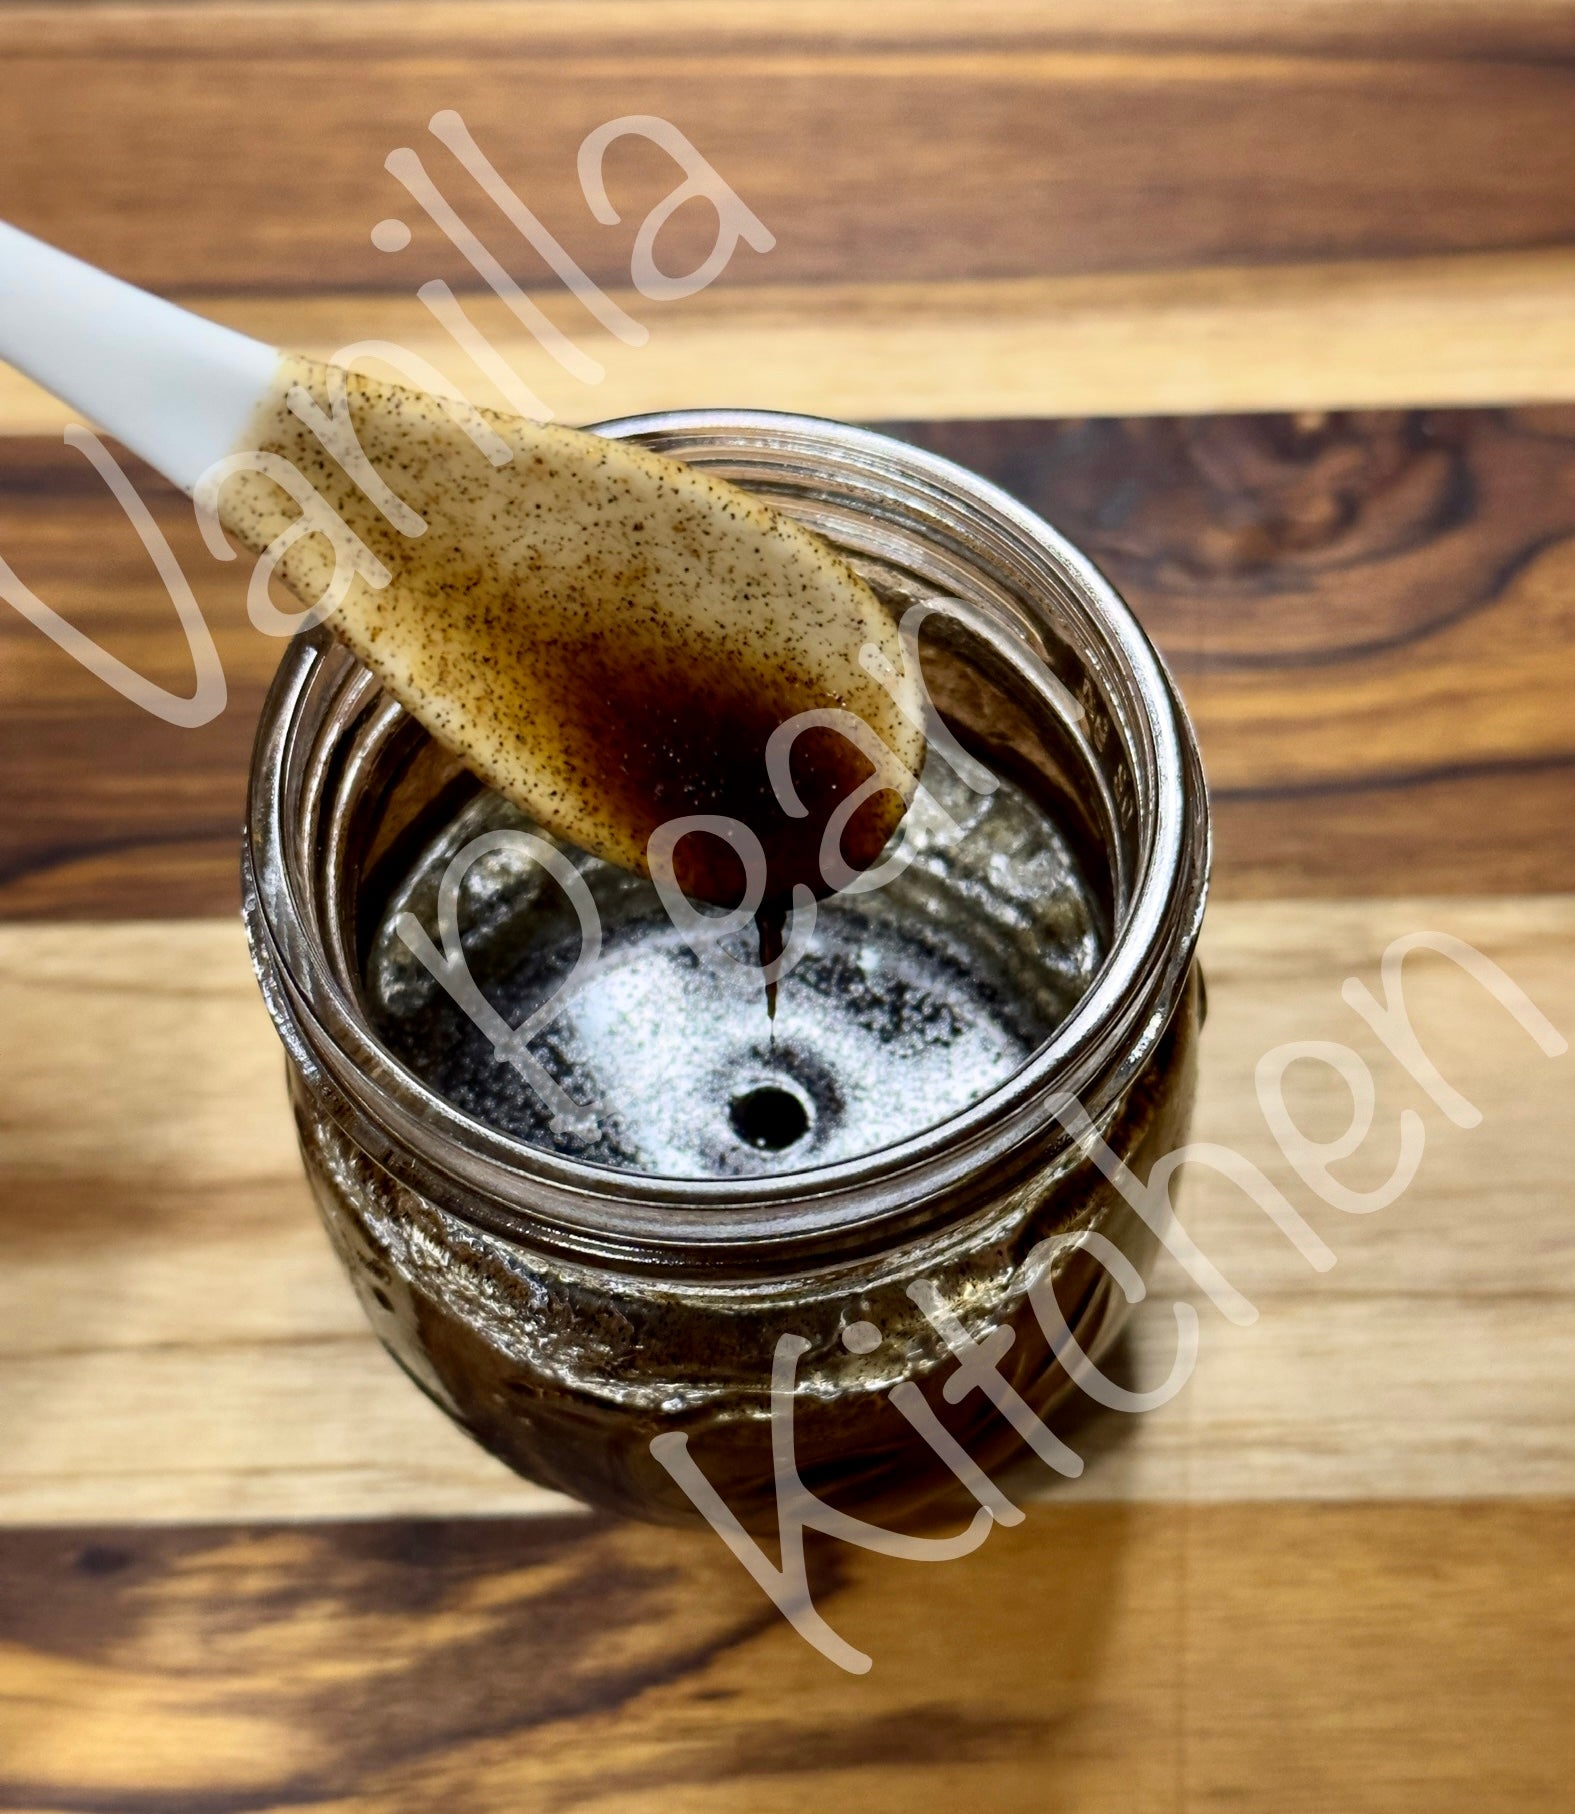 Load video: Video image of a clear jar full of thick brown viscous whole bean vanilla paste being stirred with white ceramic spoon.